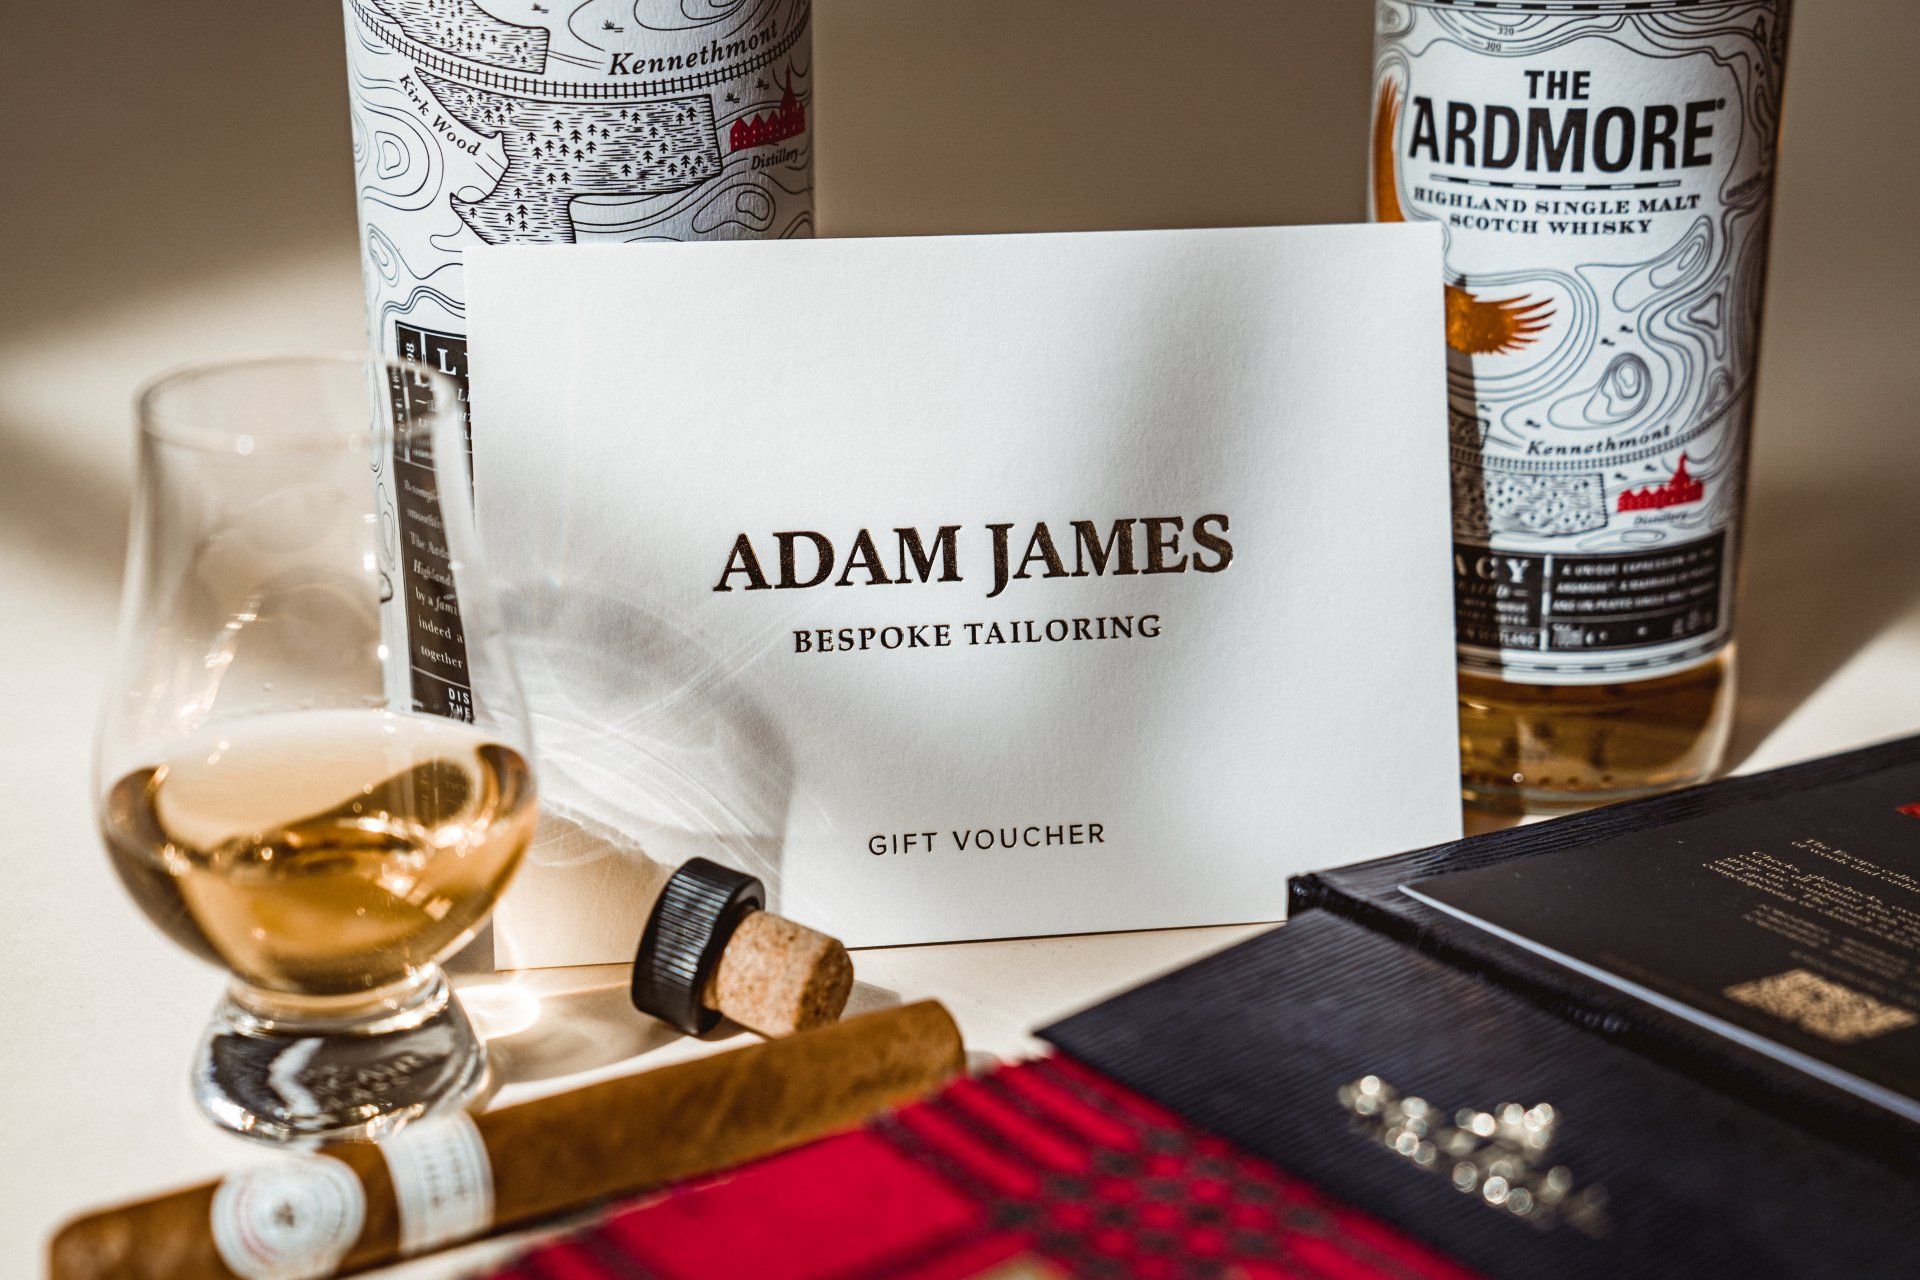 Gift cards to suit every occasion - from Adam James Bespoke tailoring